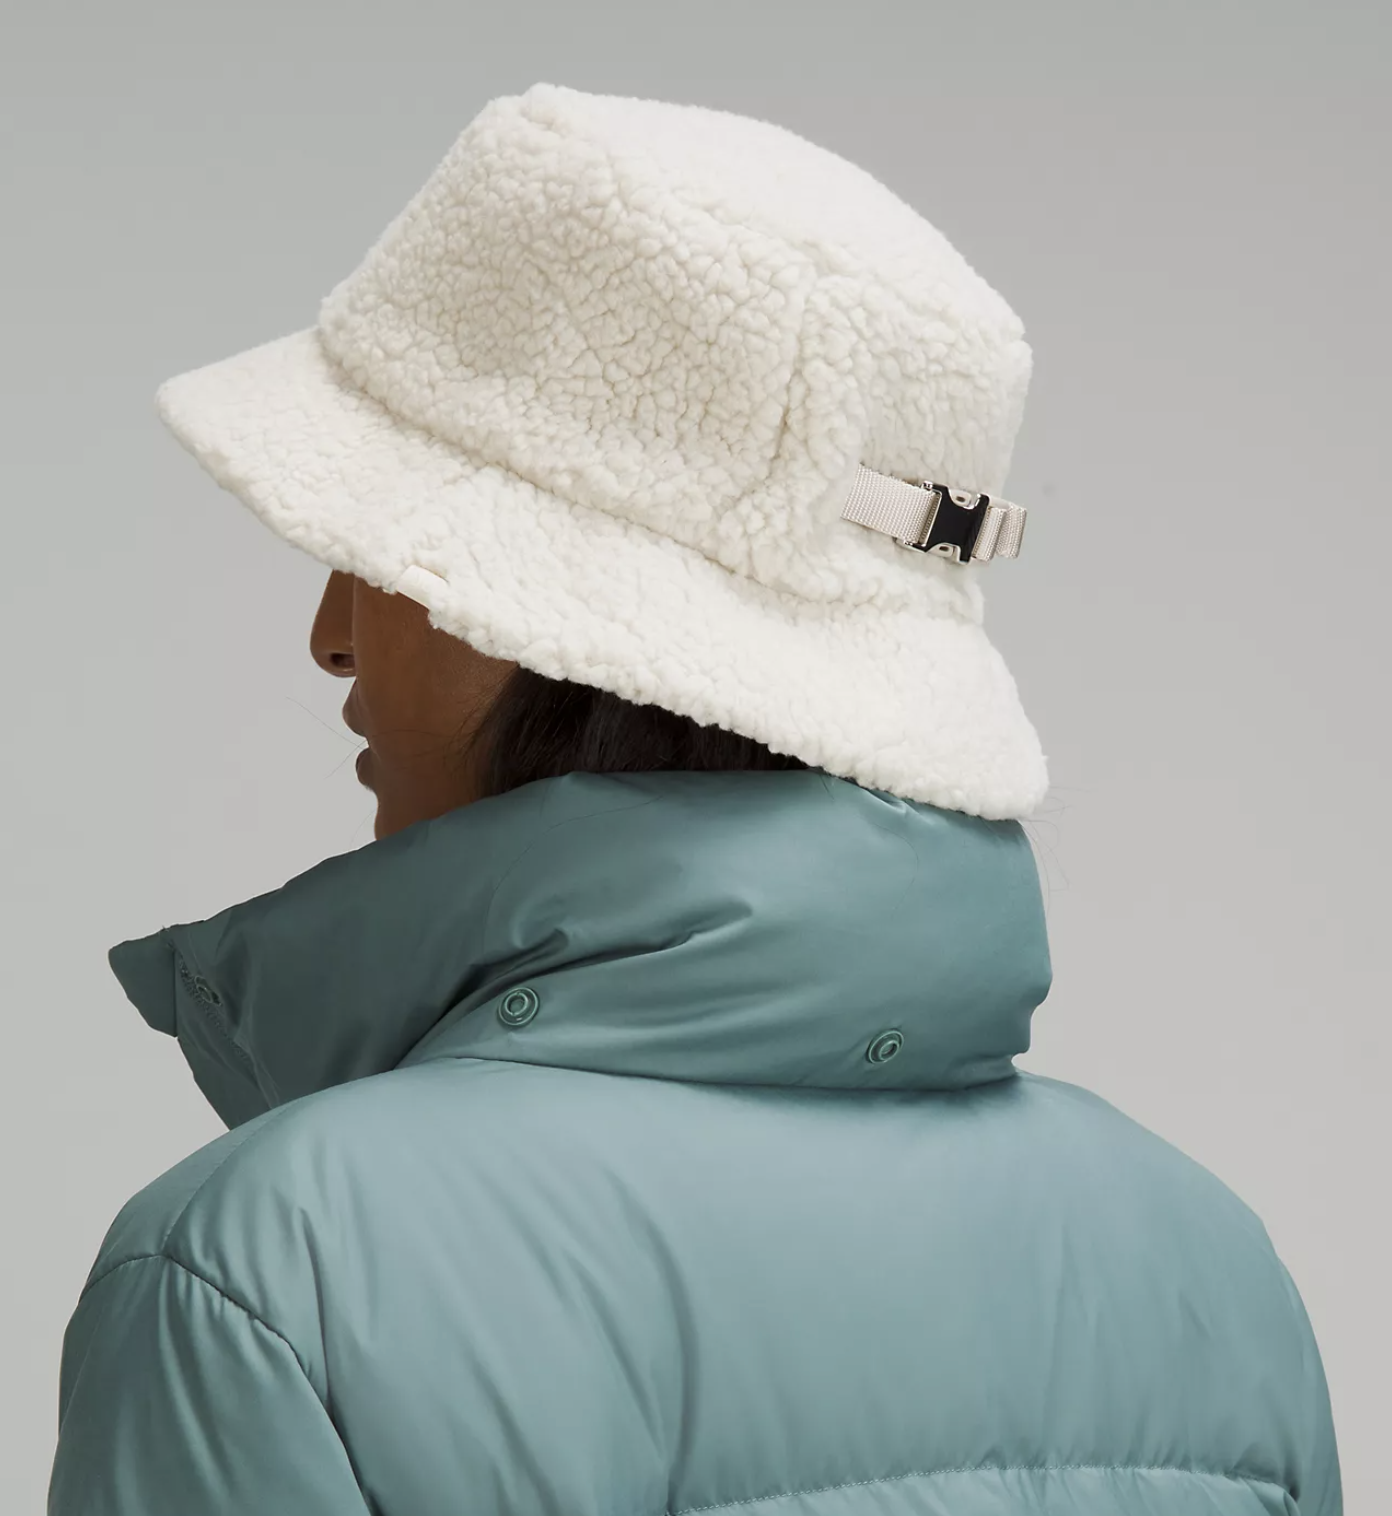 A person wearing the hat and a puffer jacket